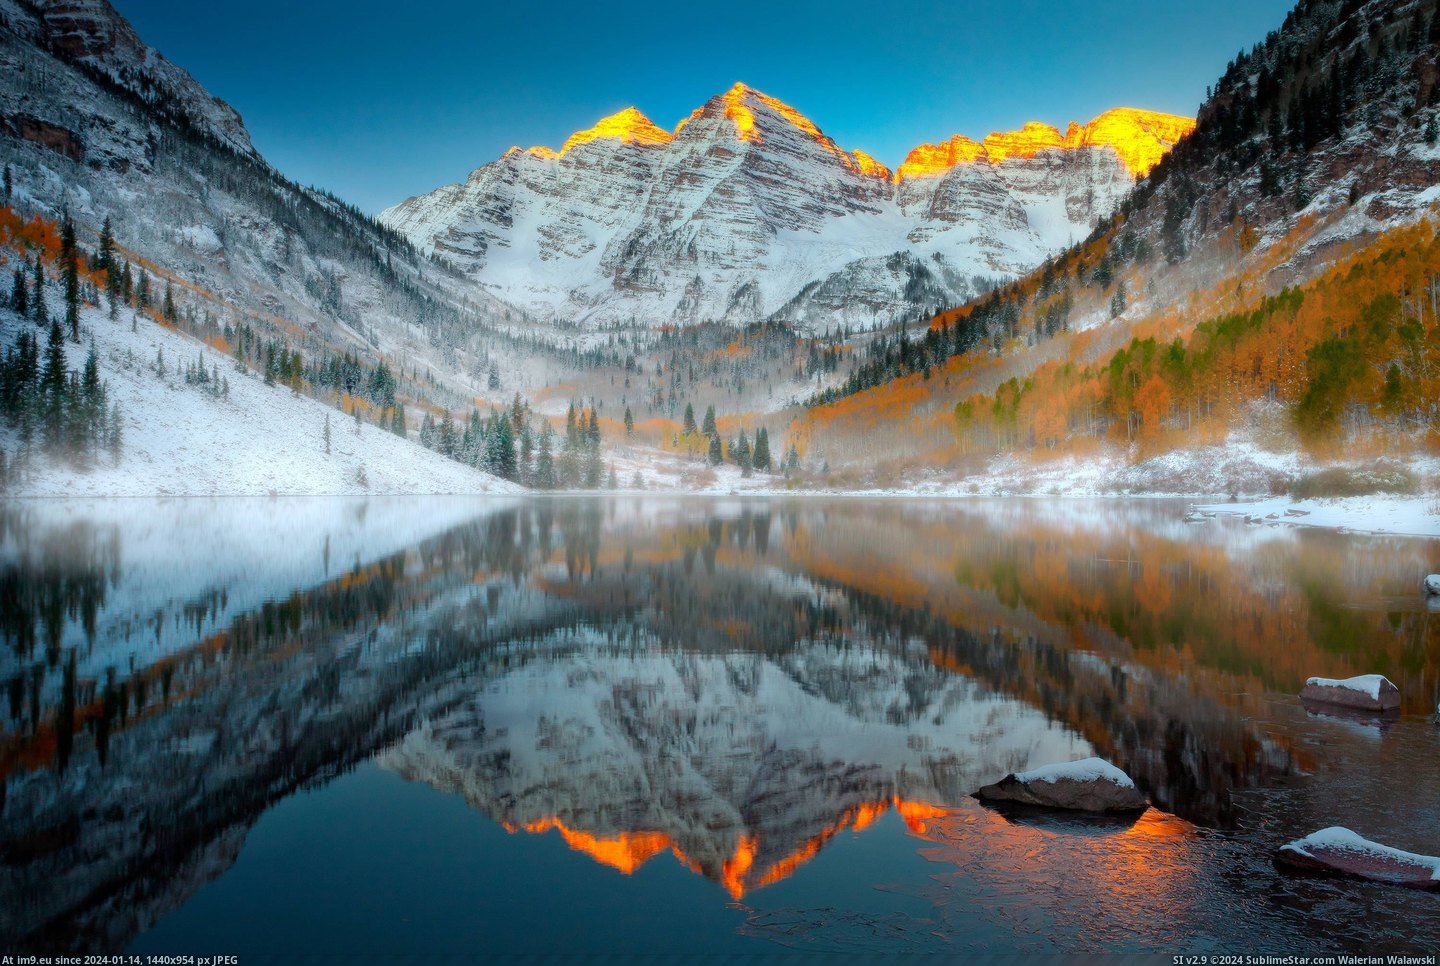 #Winter #Colorado #Sunrise #Aspen #Maroon #Mcneal #Wilderness #Kevin #Bells [Earthporn] Maroon Bells Sunrise In Winter - Maroon Bells Wilderness, Aspen, Colorado [3,000x2000] by Kevin McNeal Pic. (Image of album My r/EARTHPORN favs))